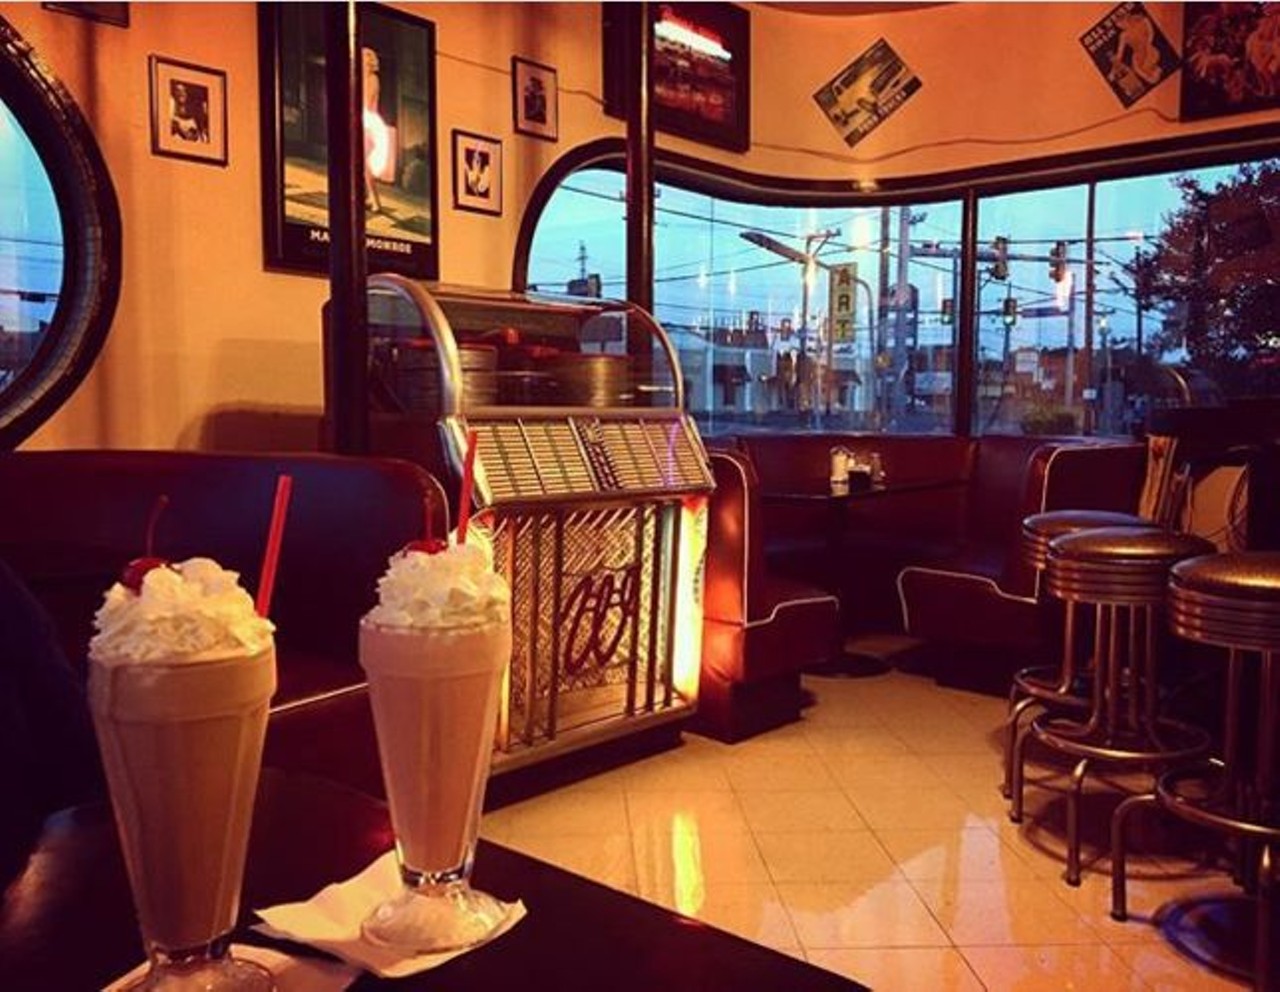 410 Diner
8315 Broadway St., (210) 822-6246
https://www.instagram.com/p/BHrC5DeDjDy/?taken-at=1112814
Do you ever want to feel like you&#146;re in a Norman Rockwell painting? Well, this retro 1950&#146;s-style restaurant can make that happen. At 410 Diner, you can enjoy a wide variety of classic American dishes, all while taking in the rich historic atmosphere. 
Photo via Instagram,  ashleybrookejames